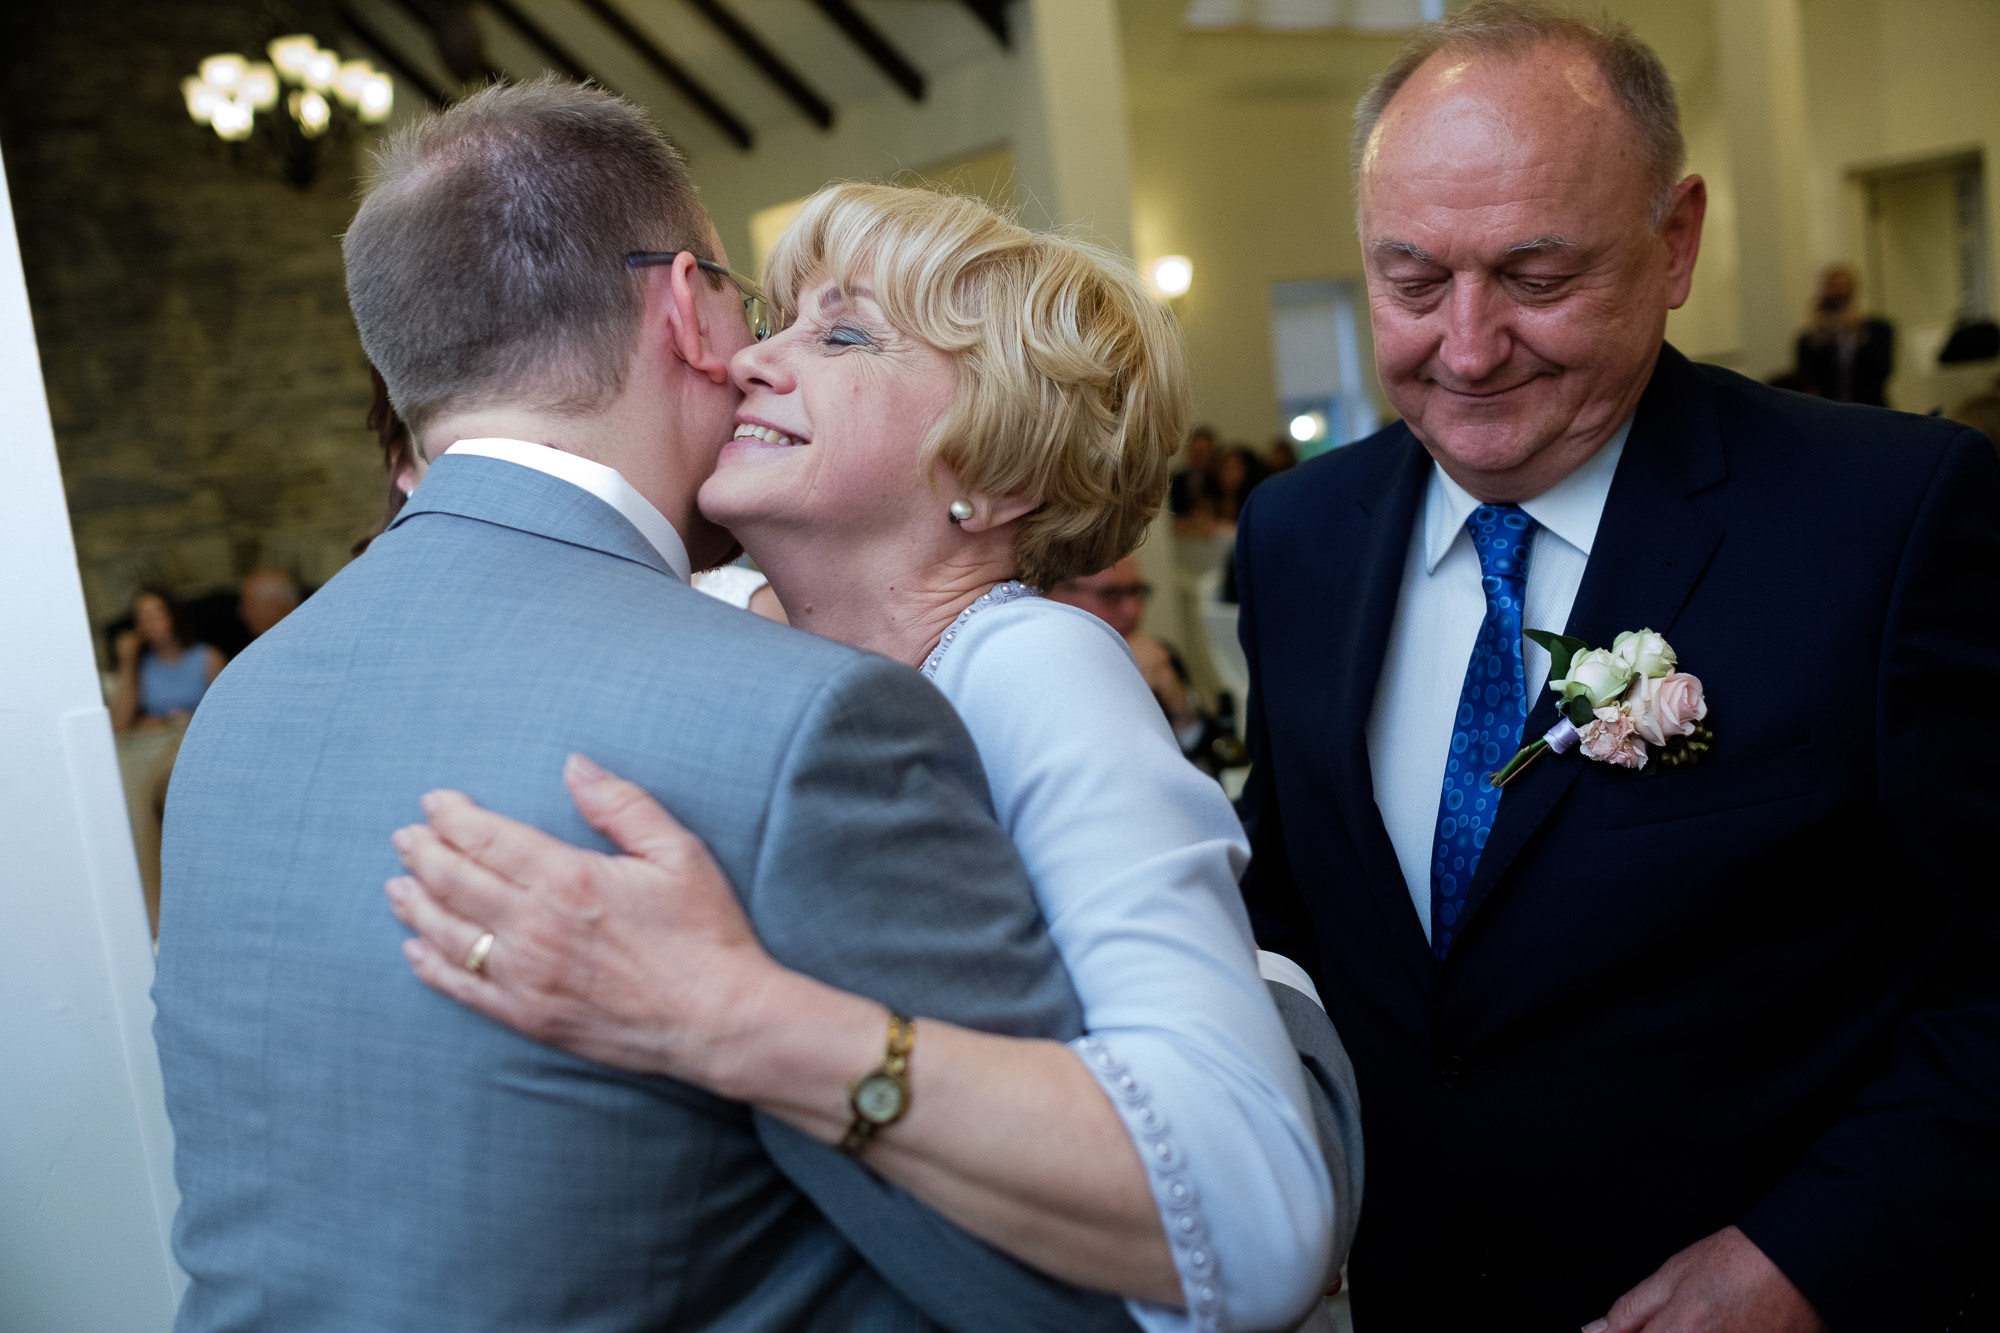  The groom give his mom a hug after her wedding toast during the wedding reception at the Glenerin Inn outside of Toronto 